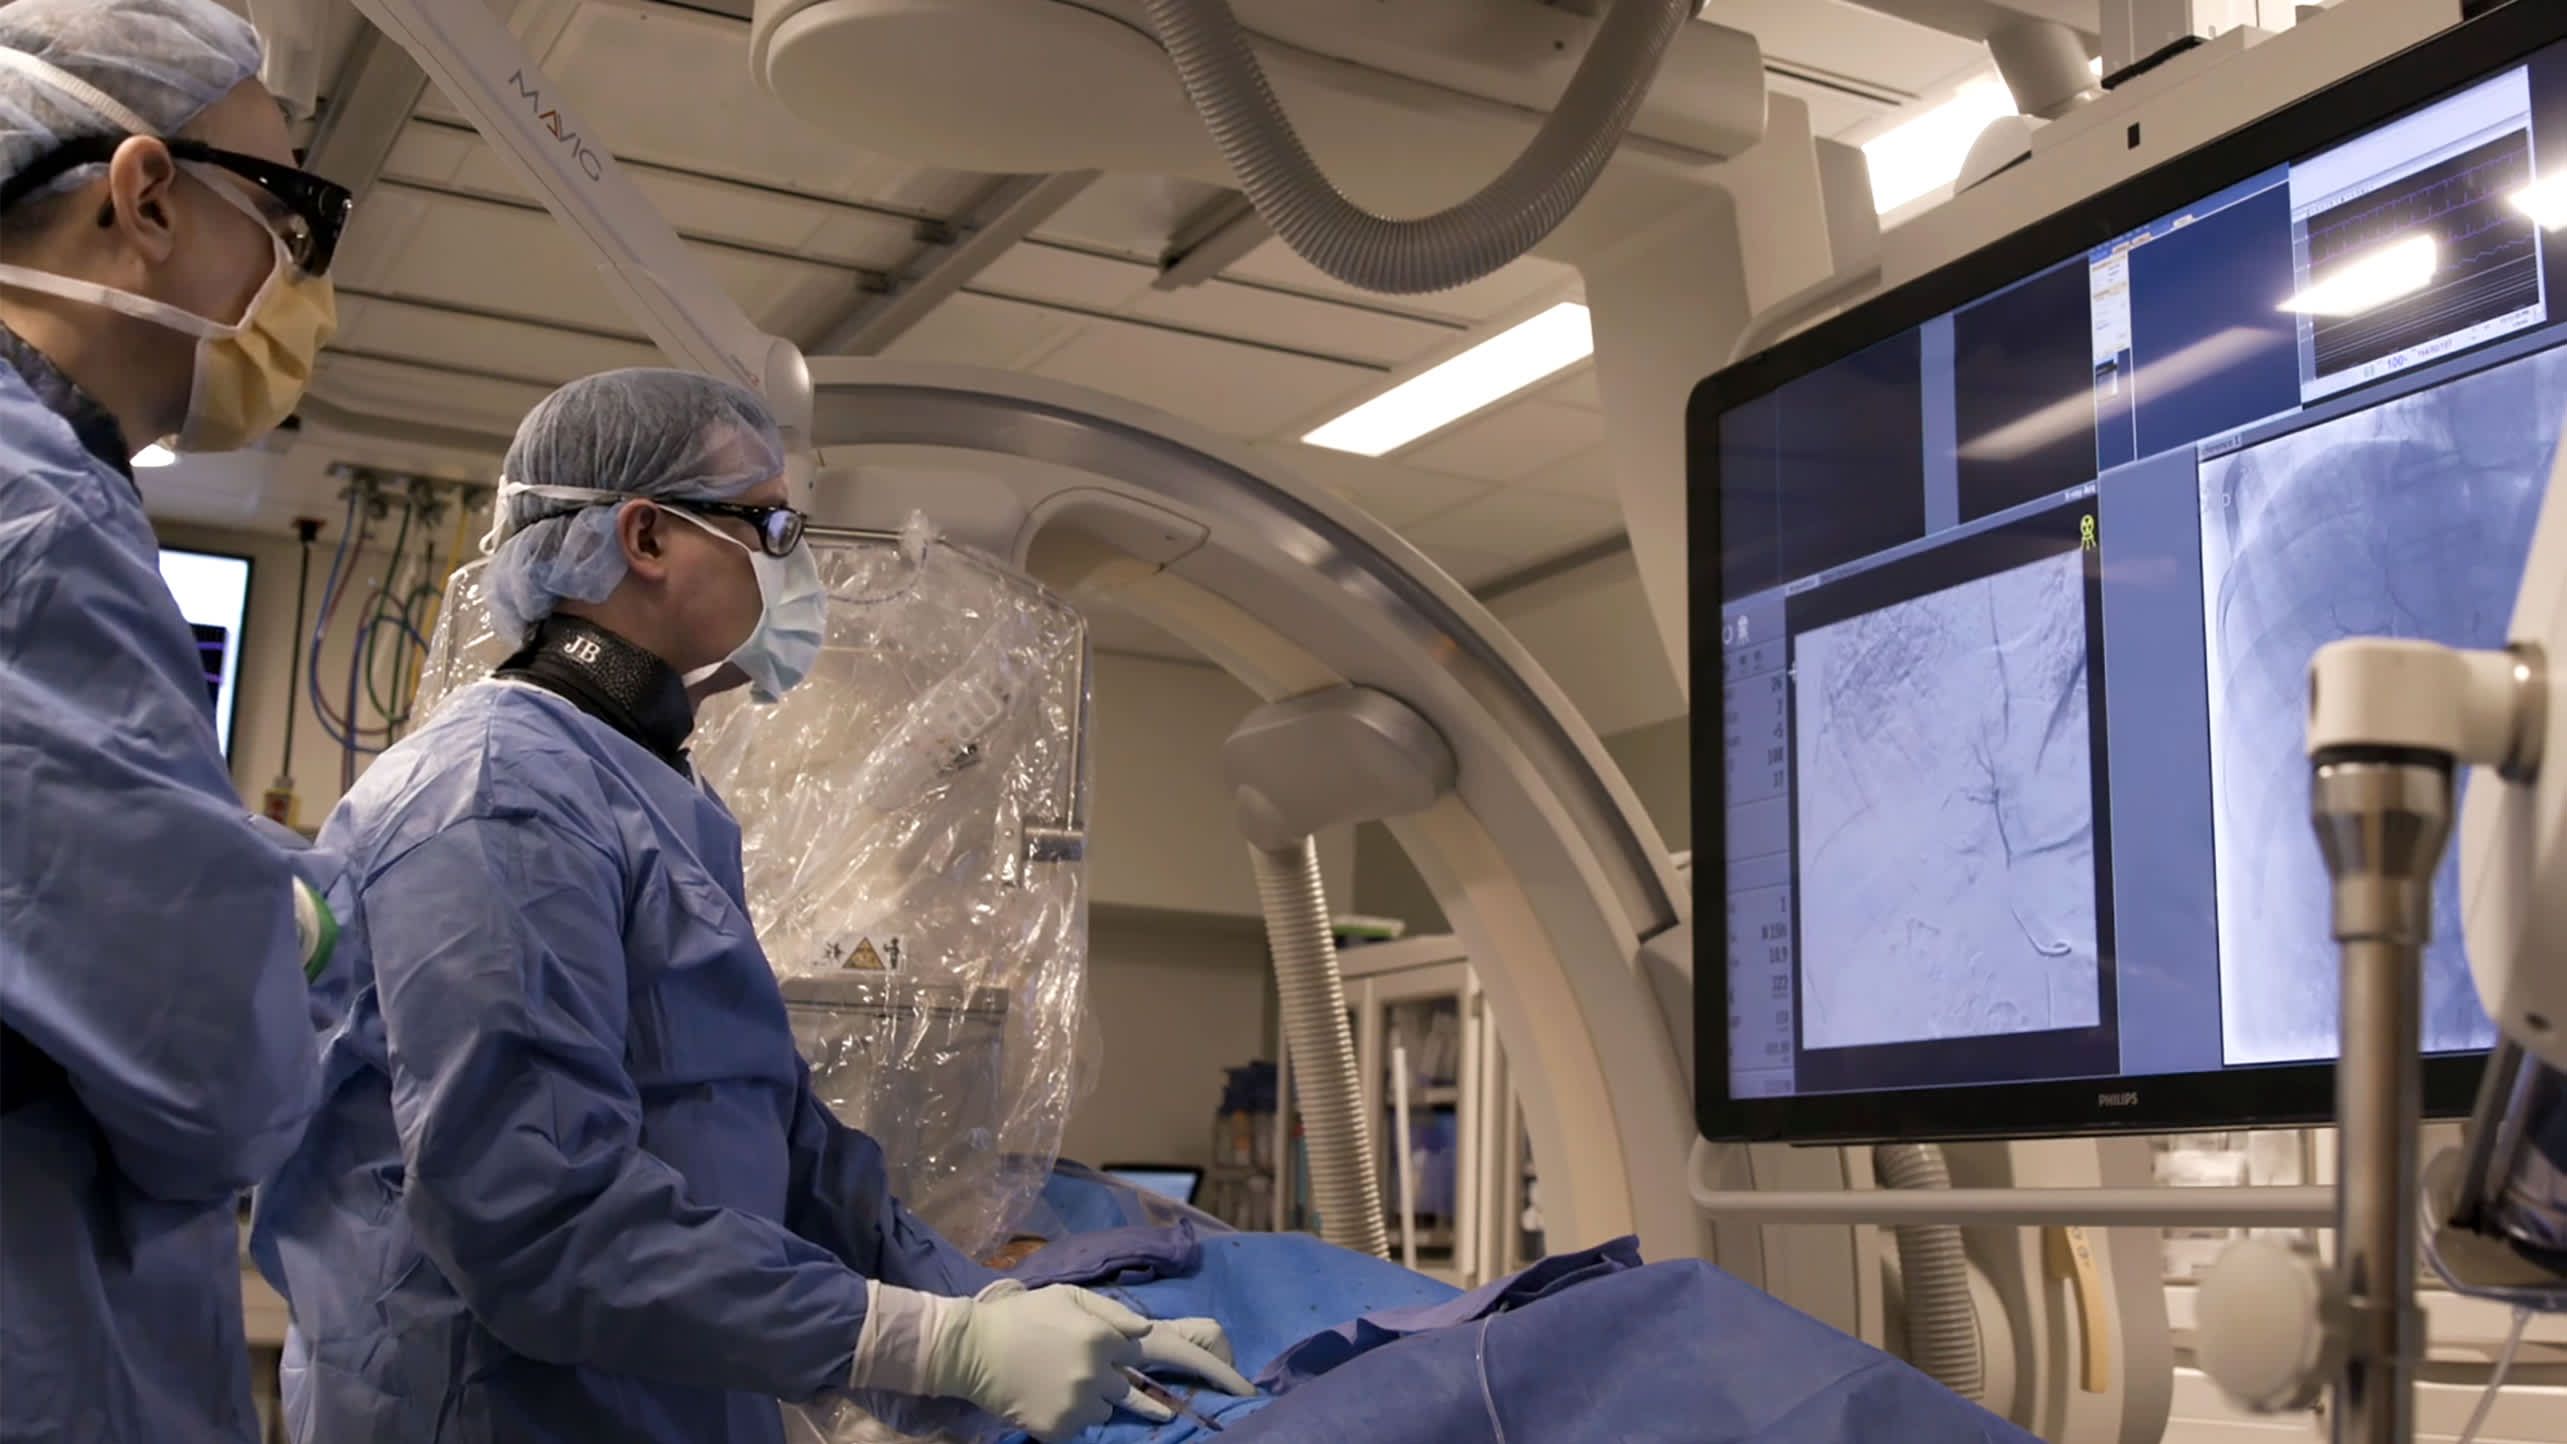 Interventional radiologist perform an interventional oncology procedure.